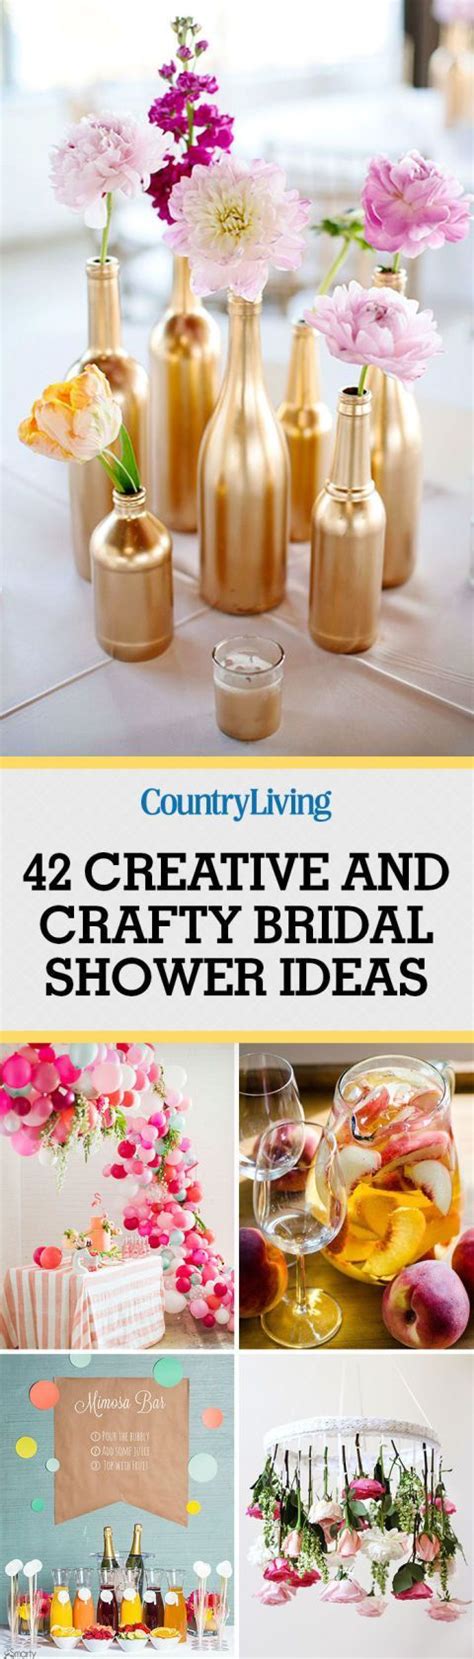 60 Creative Bridal Shower Ideas Every Kind Of Bride Will Love Bridal